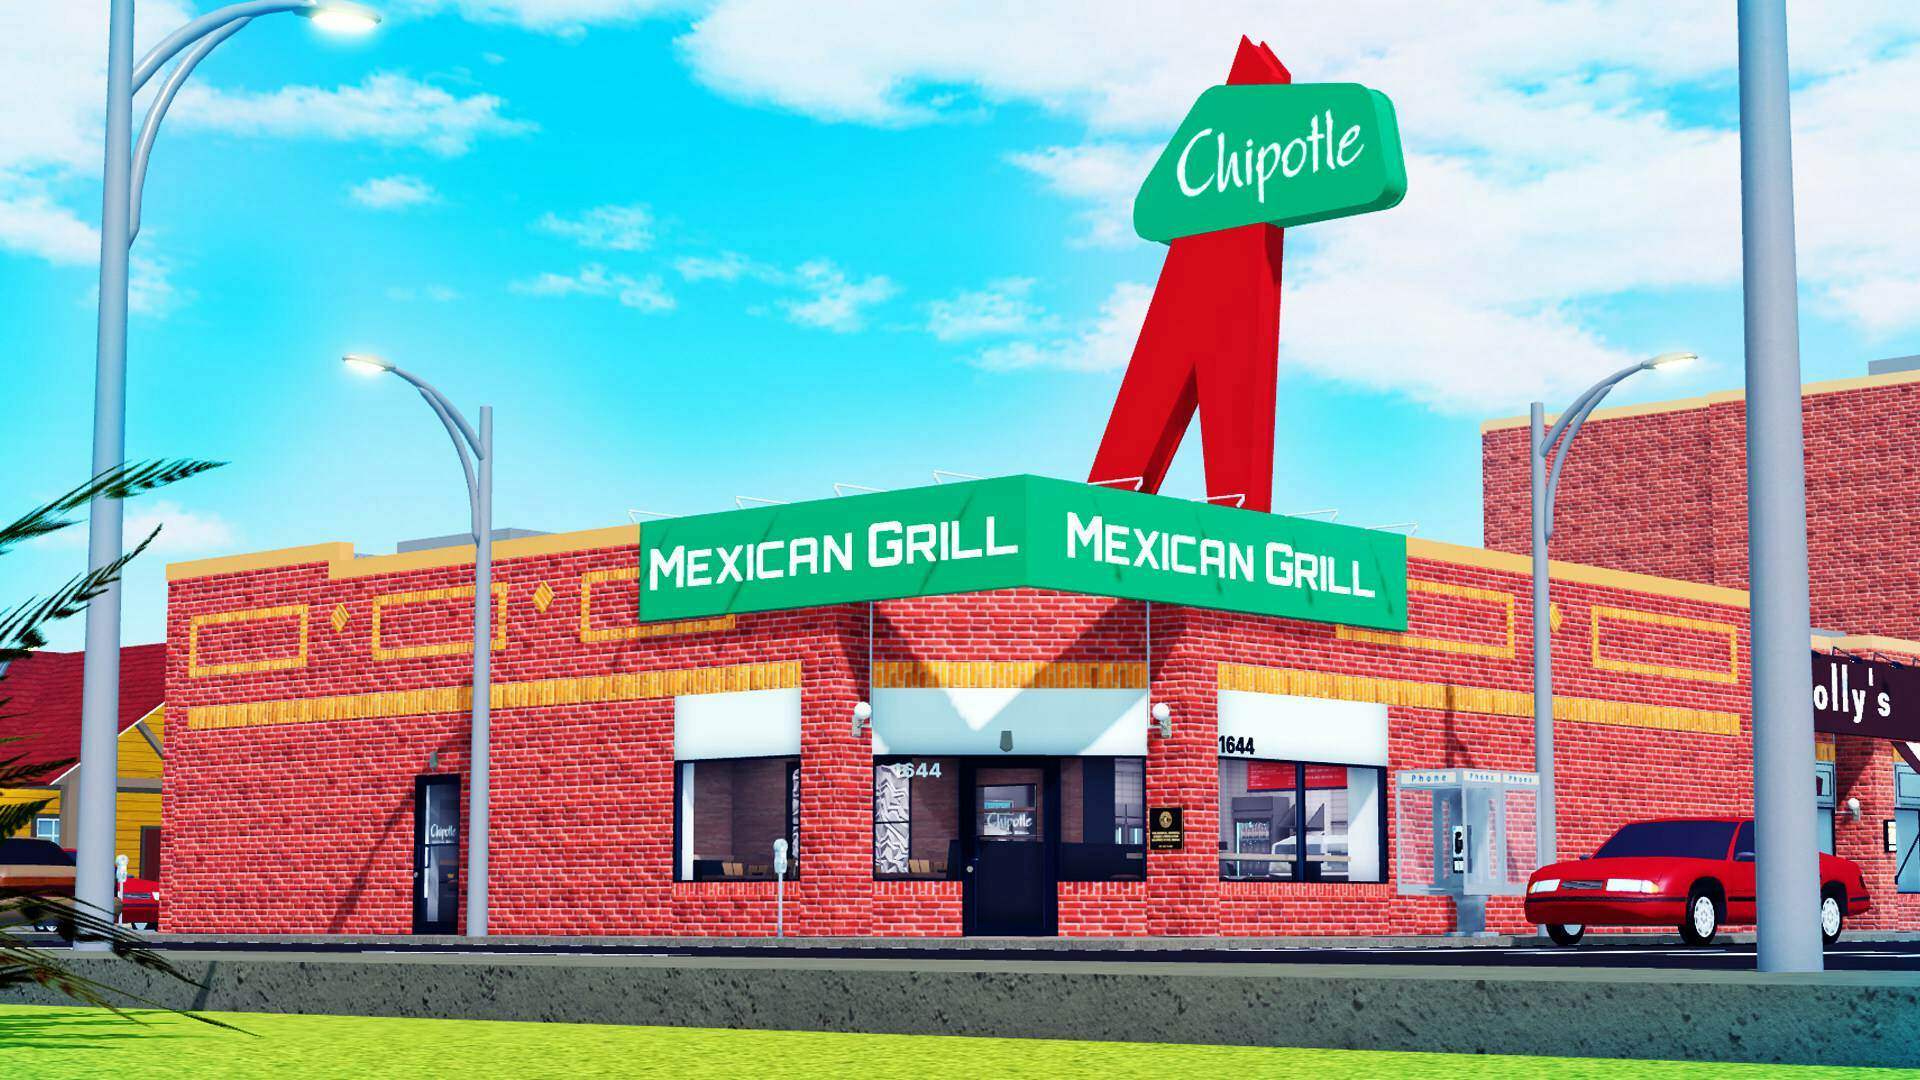 Chipotle in the metaverse